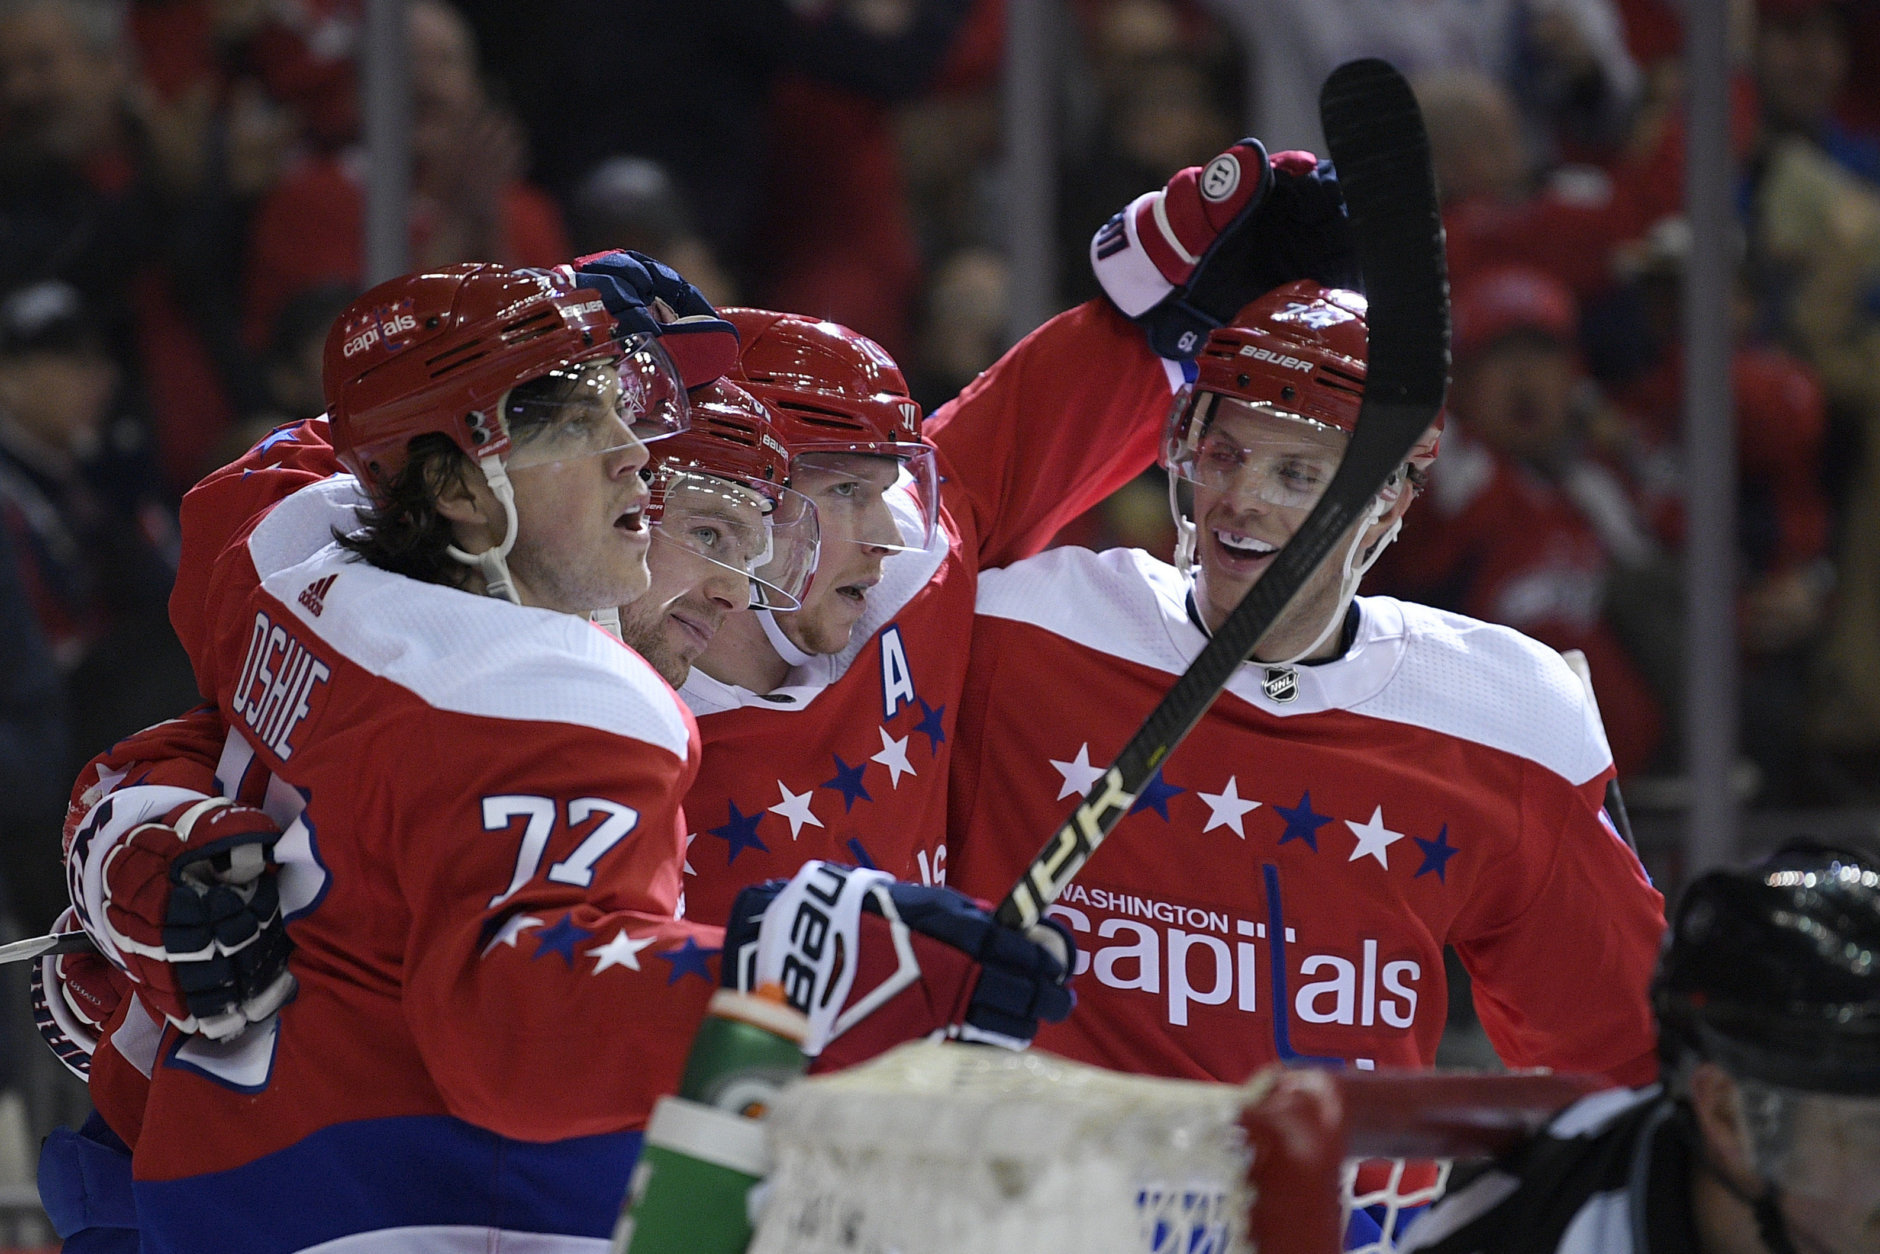 Washington Capitals center Evgeny Kuznetsov, second from the left, of Russia, celebrates his goal with right wing T.J. Oshie (77), center Nicklas Backstrom, third from right, and defenseman John Carlson, right, during the second period of an NHL hockey game against the Colorado Avalanche, Thursday, Feb. 7, 2019, in Washington. (AP Photo/Nick Wass)